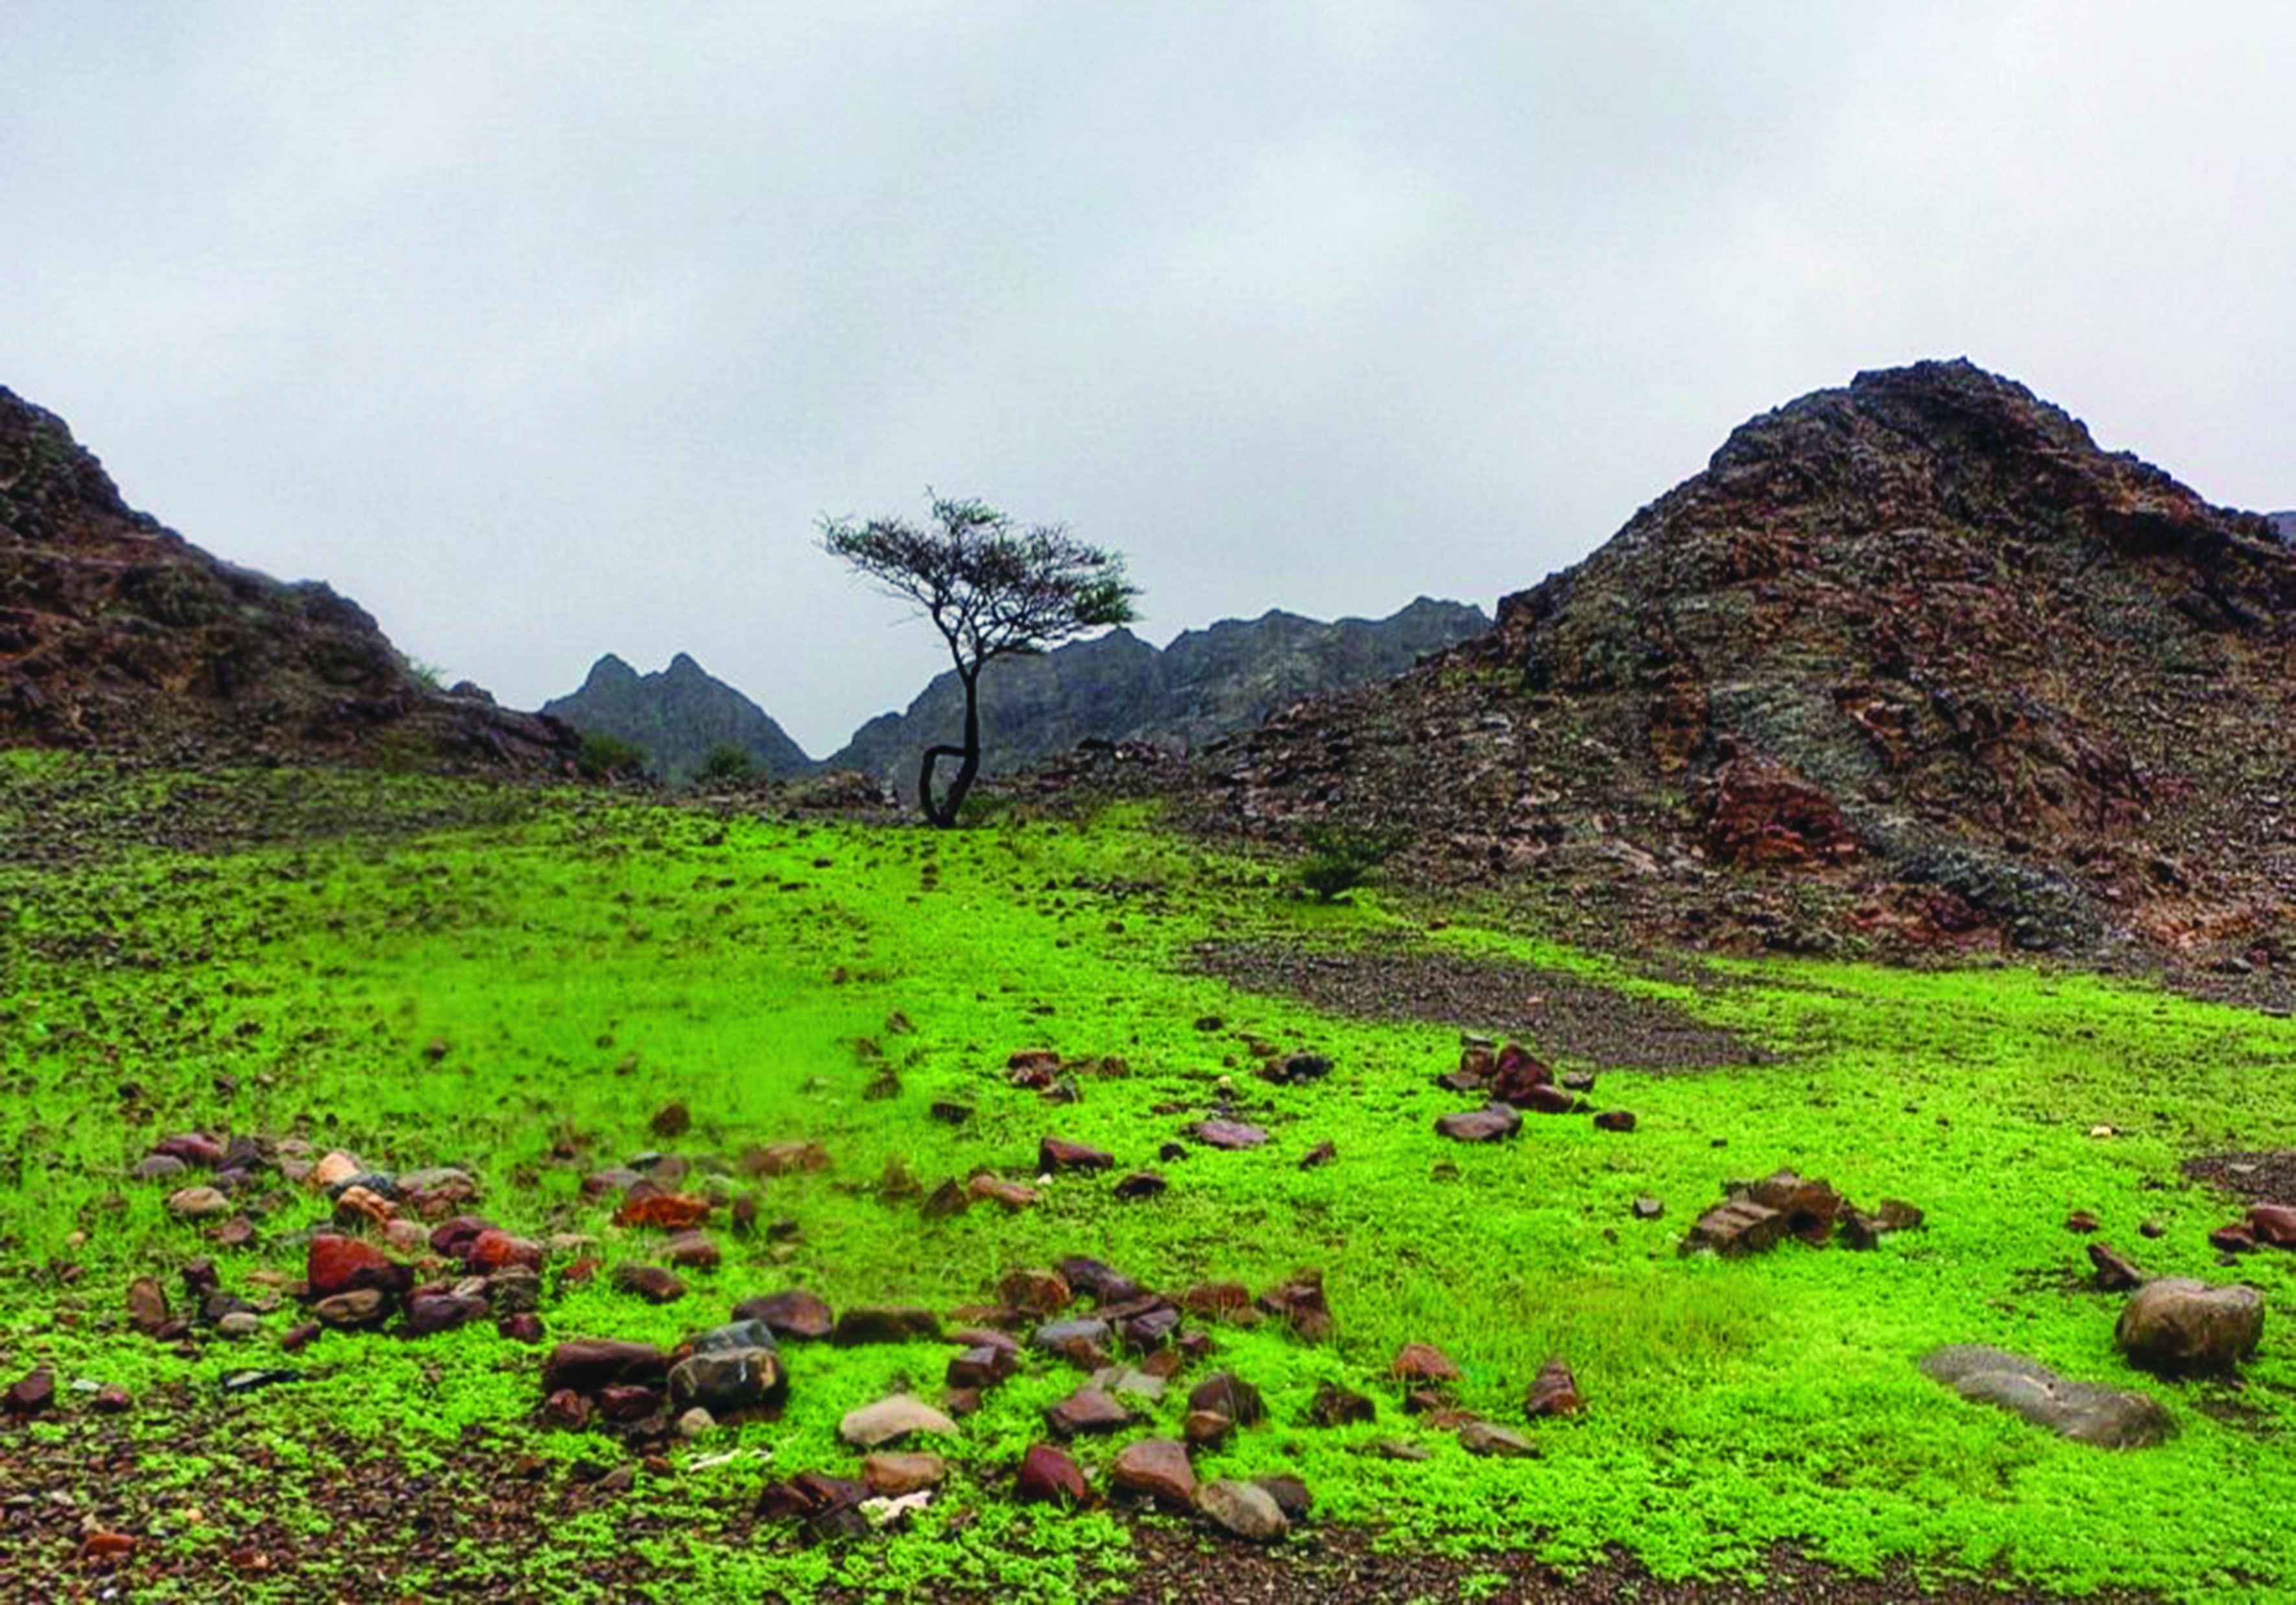 In pictures: Green mountains of Oman make for some stunning landscapes